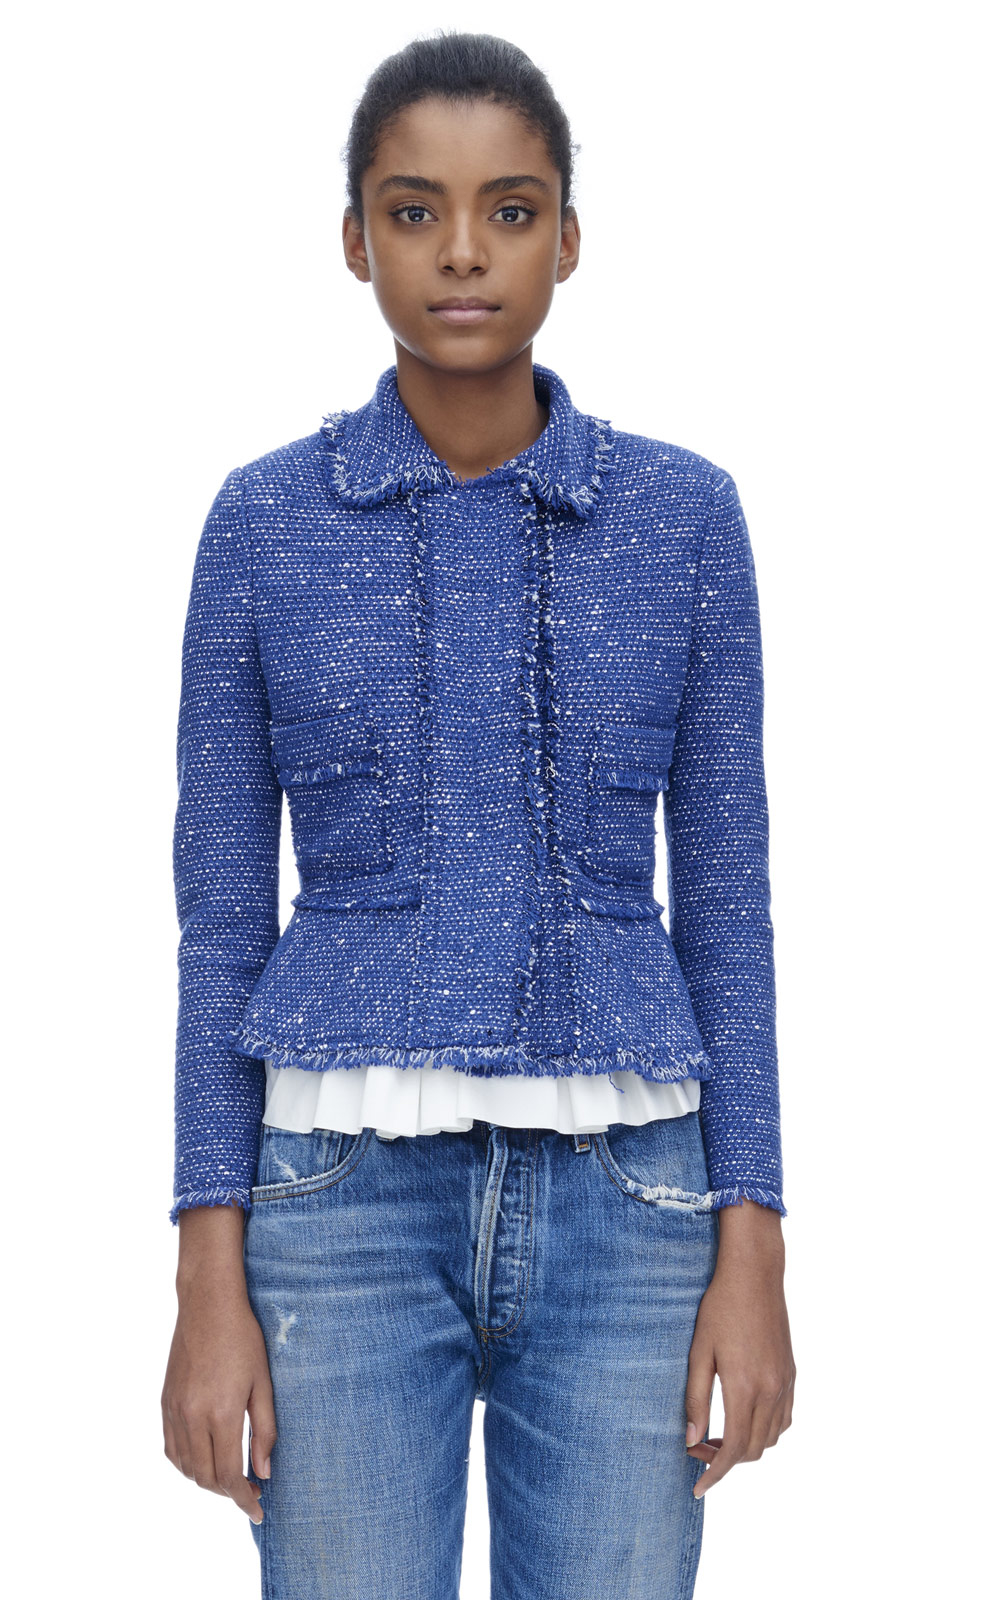 Lyst - Rebecca Taylor Tweed And Denim Jacket - Blue Combo 